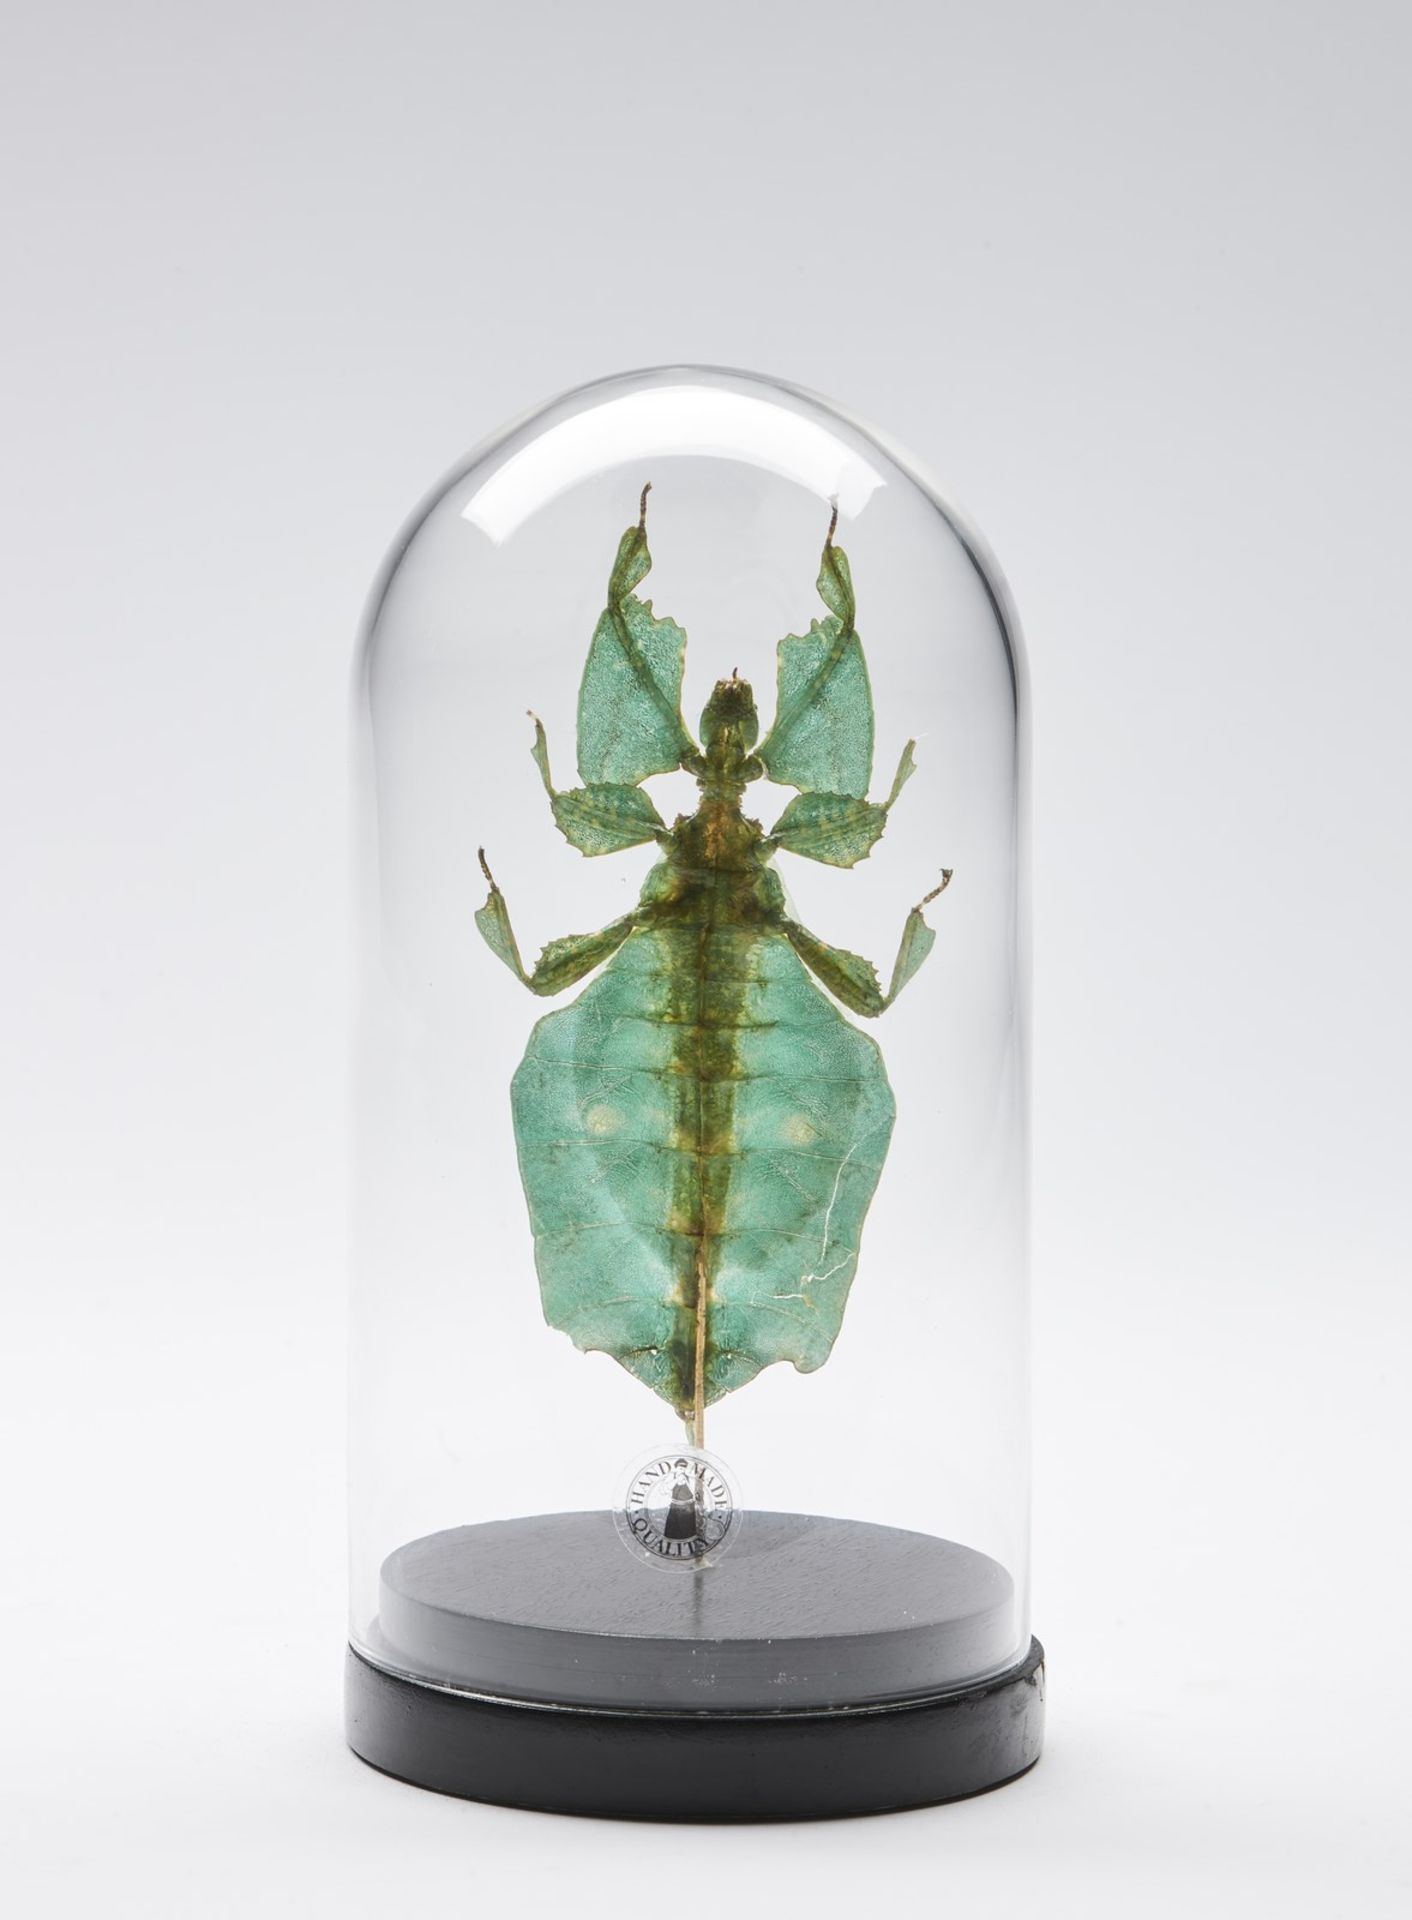 Naturalia Giant leaf insect under glass bell. - Image 2 of 2